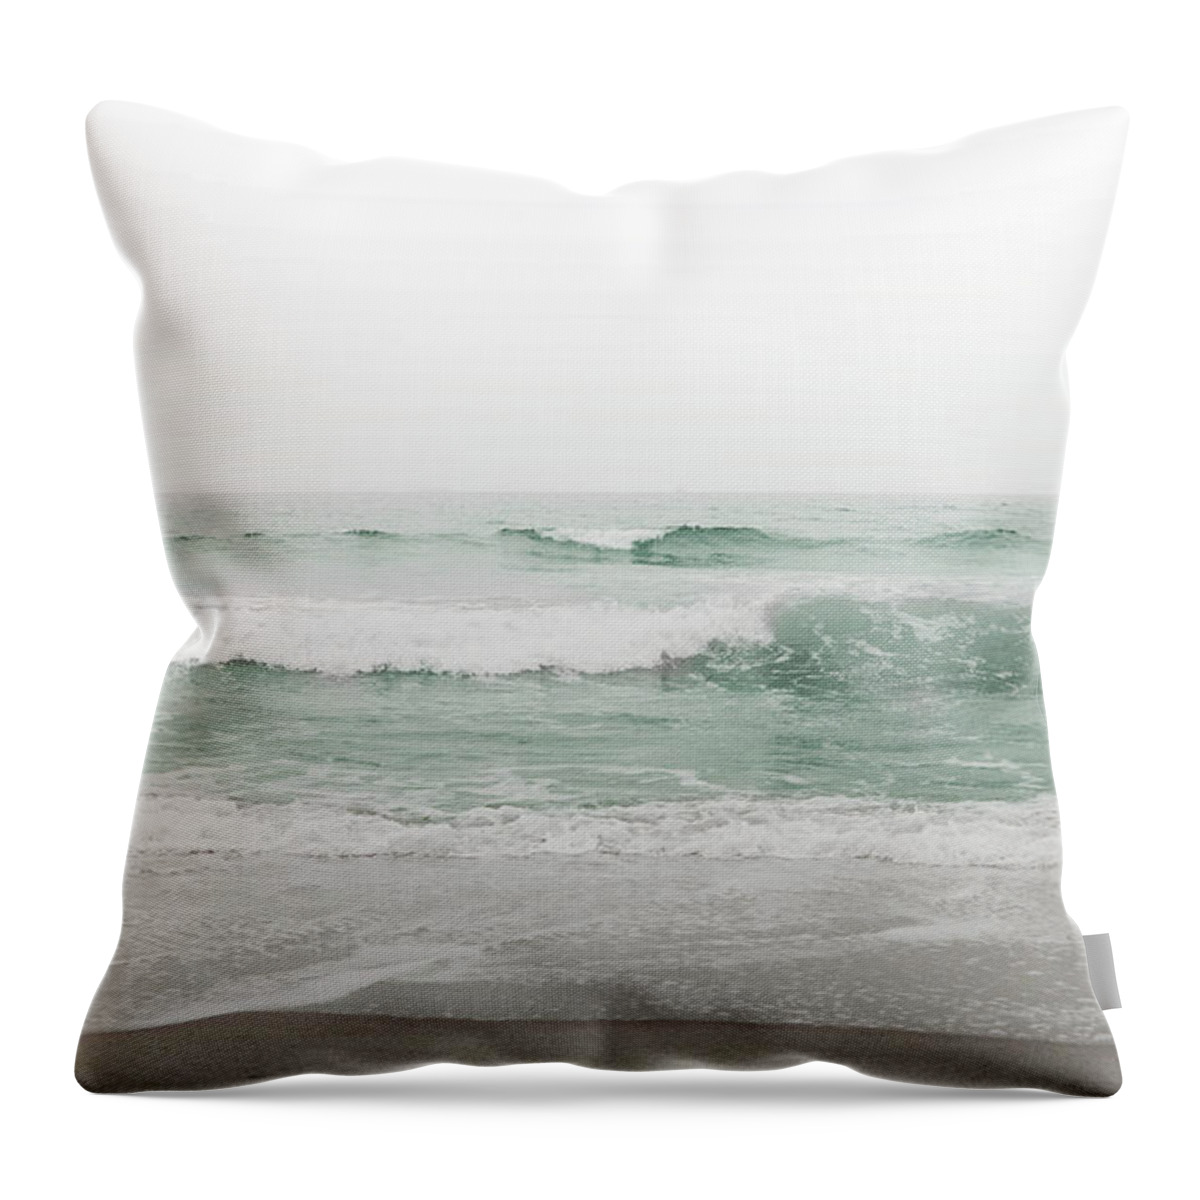 Coast Throw Pillow featuring the photograph Beneath The Fog 2- Photography by Linda Woods by Linda Woods